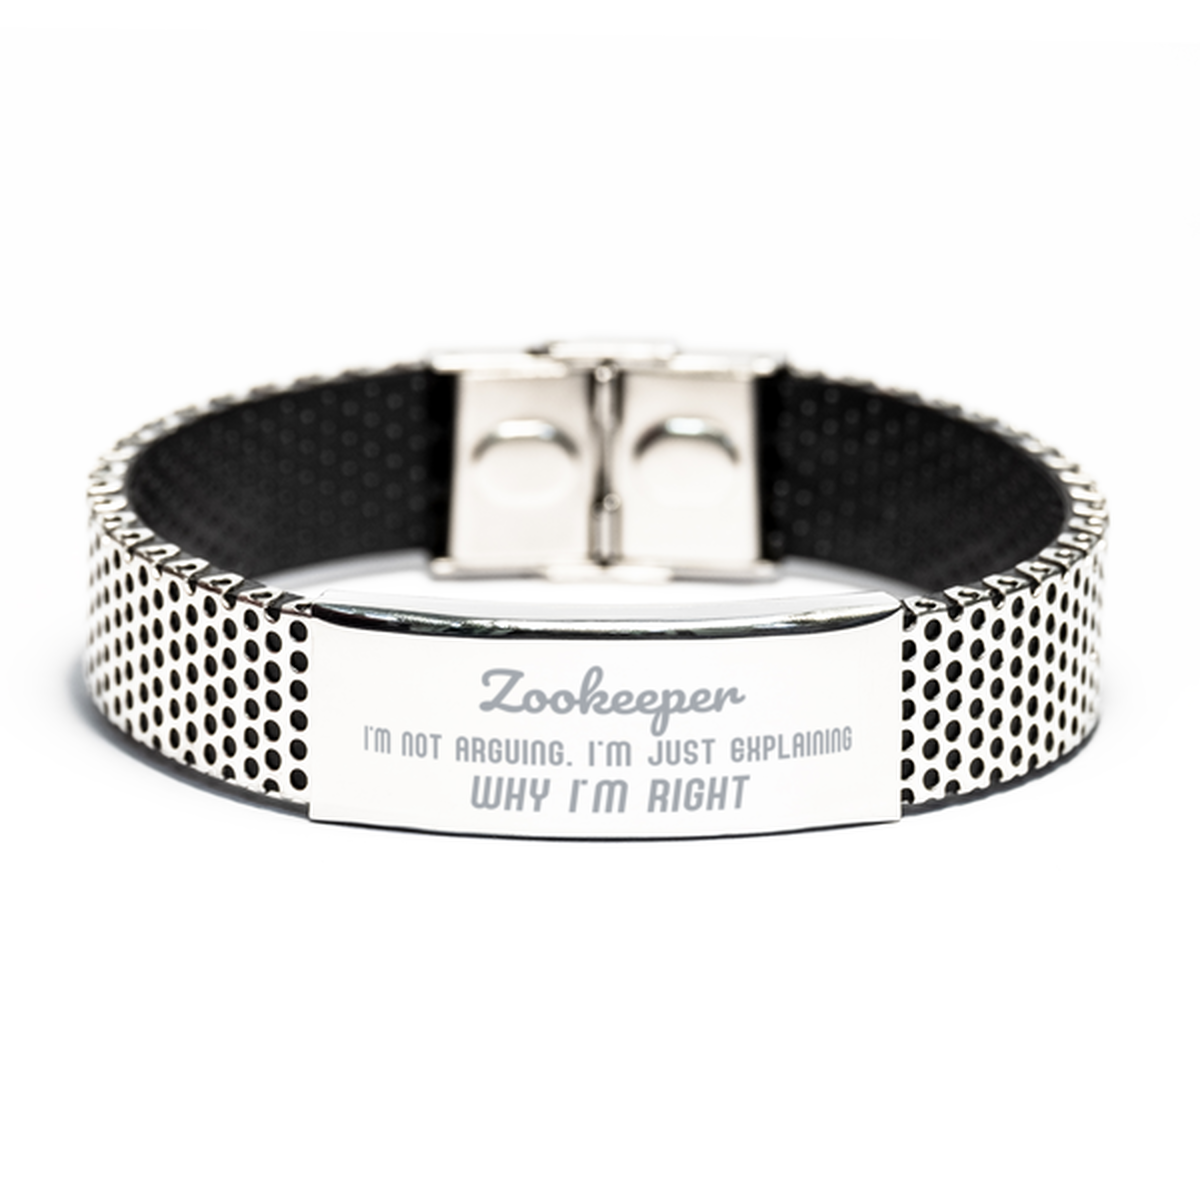 Zookeeper I'm not Arguing. I'm Just Explaining Why I'm RIGHT Stainless Steel Bracelet, Funny Saying Quote Zookeeper Gifts For Zookeeper Graduation Birthday Christmas Gifts for Men Women Coworker